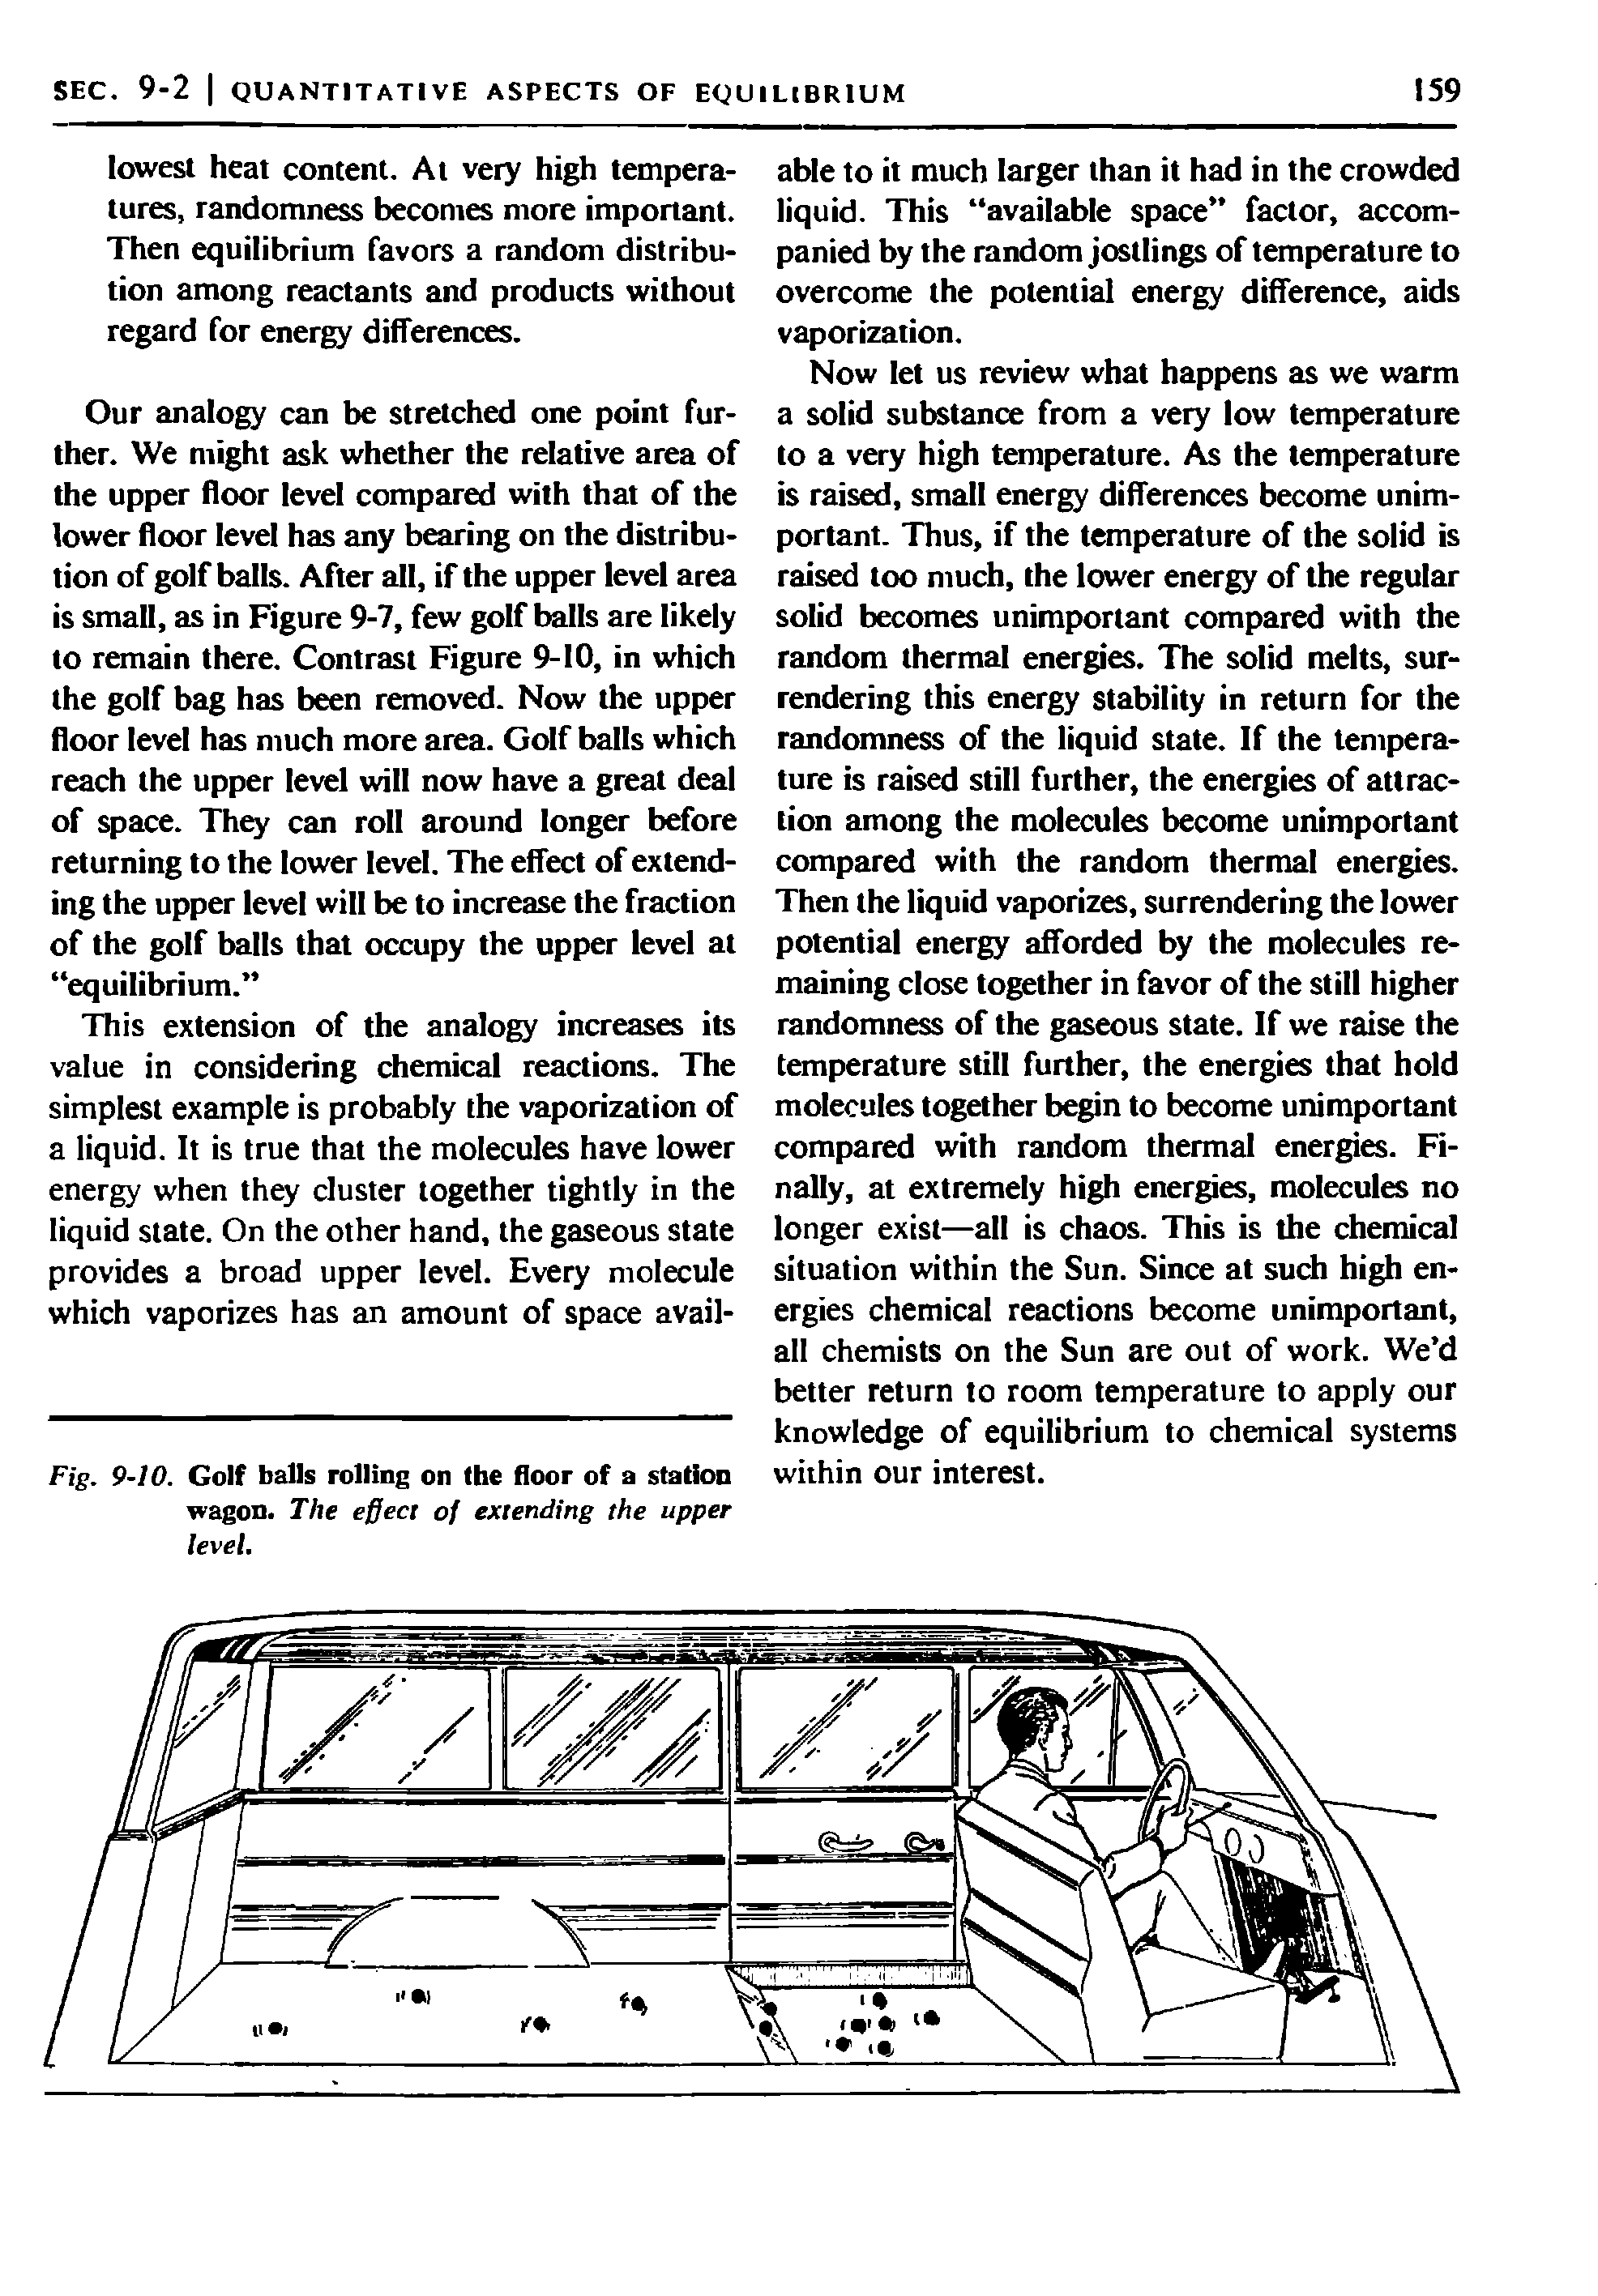 Fig. 9-10. Golf balls rolling on the floor of a station wagon. The effect of extending the upper level.